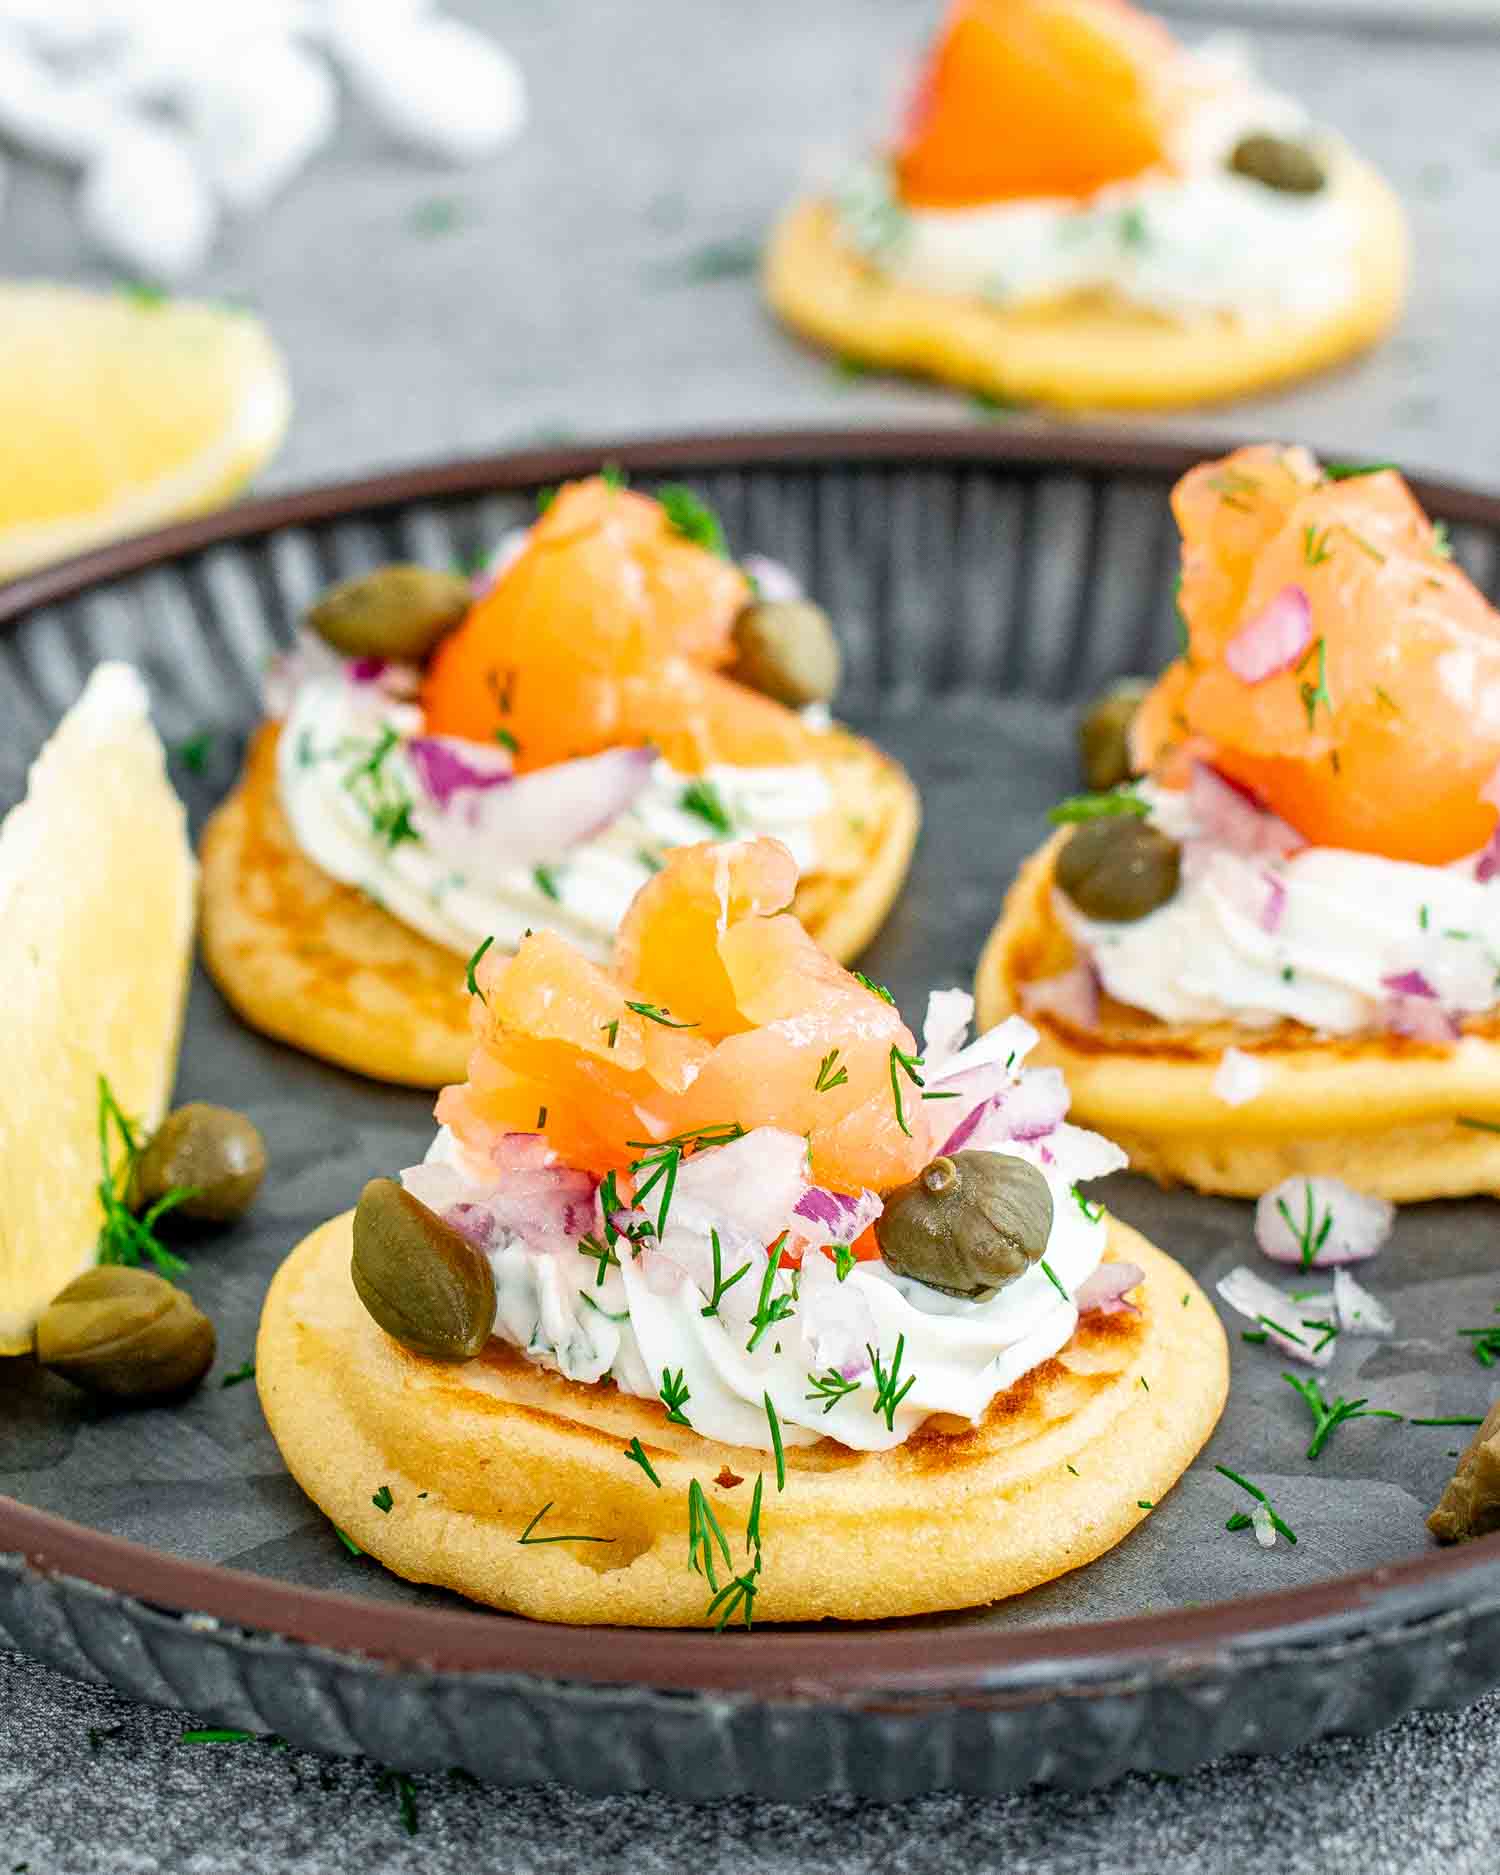 freshly made smoked salmon blinis on a gray plate garnished with lemon wedges.